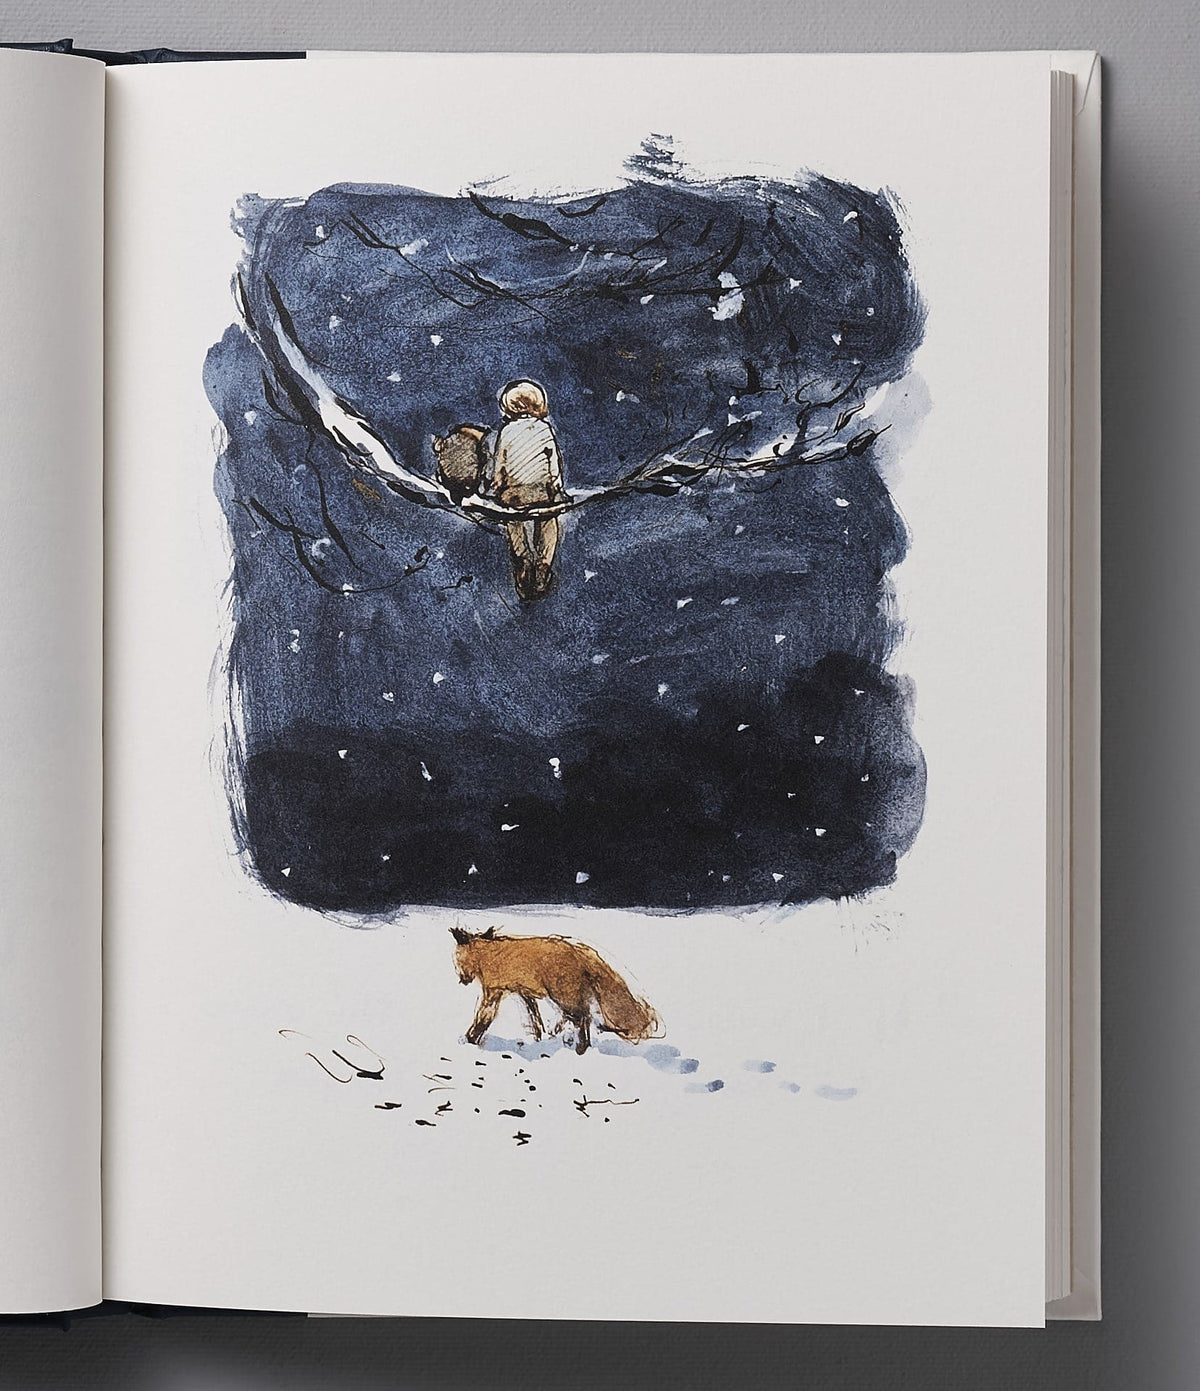 An open book with an illustration of &quot;The Boy, the Mole, the Fox and the Horse&quot; by Charlie Mackesy.